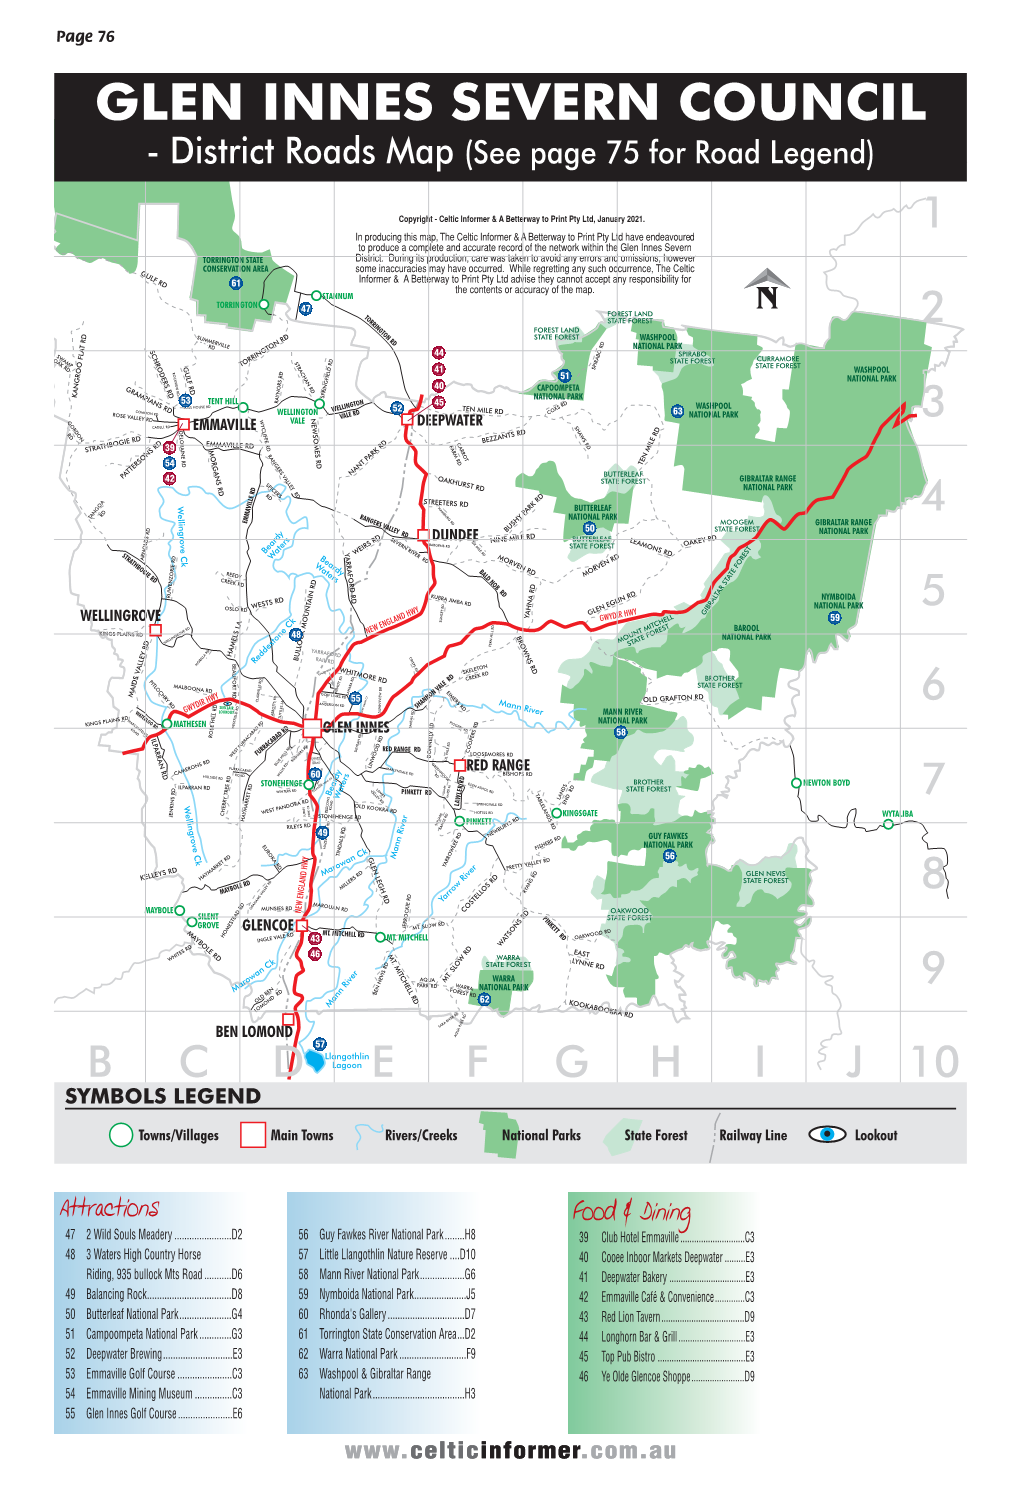 GLEN INNES SEVERN COUNCIL - District Roads Map (See Page 75 for Road Legend)